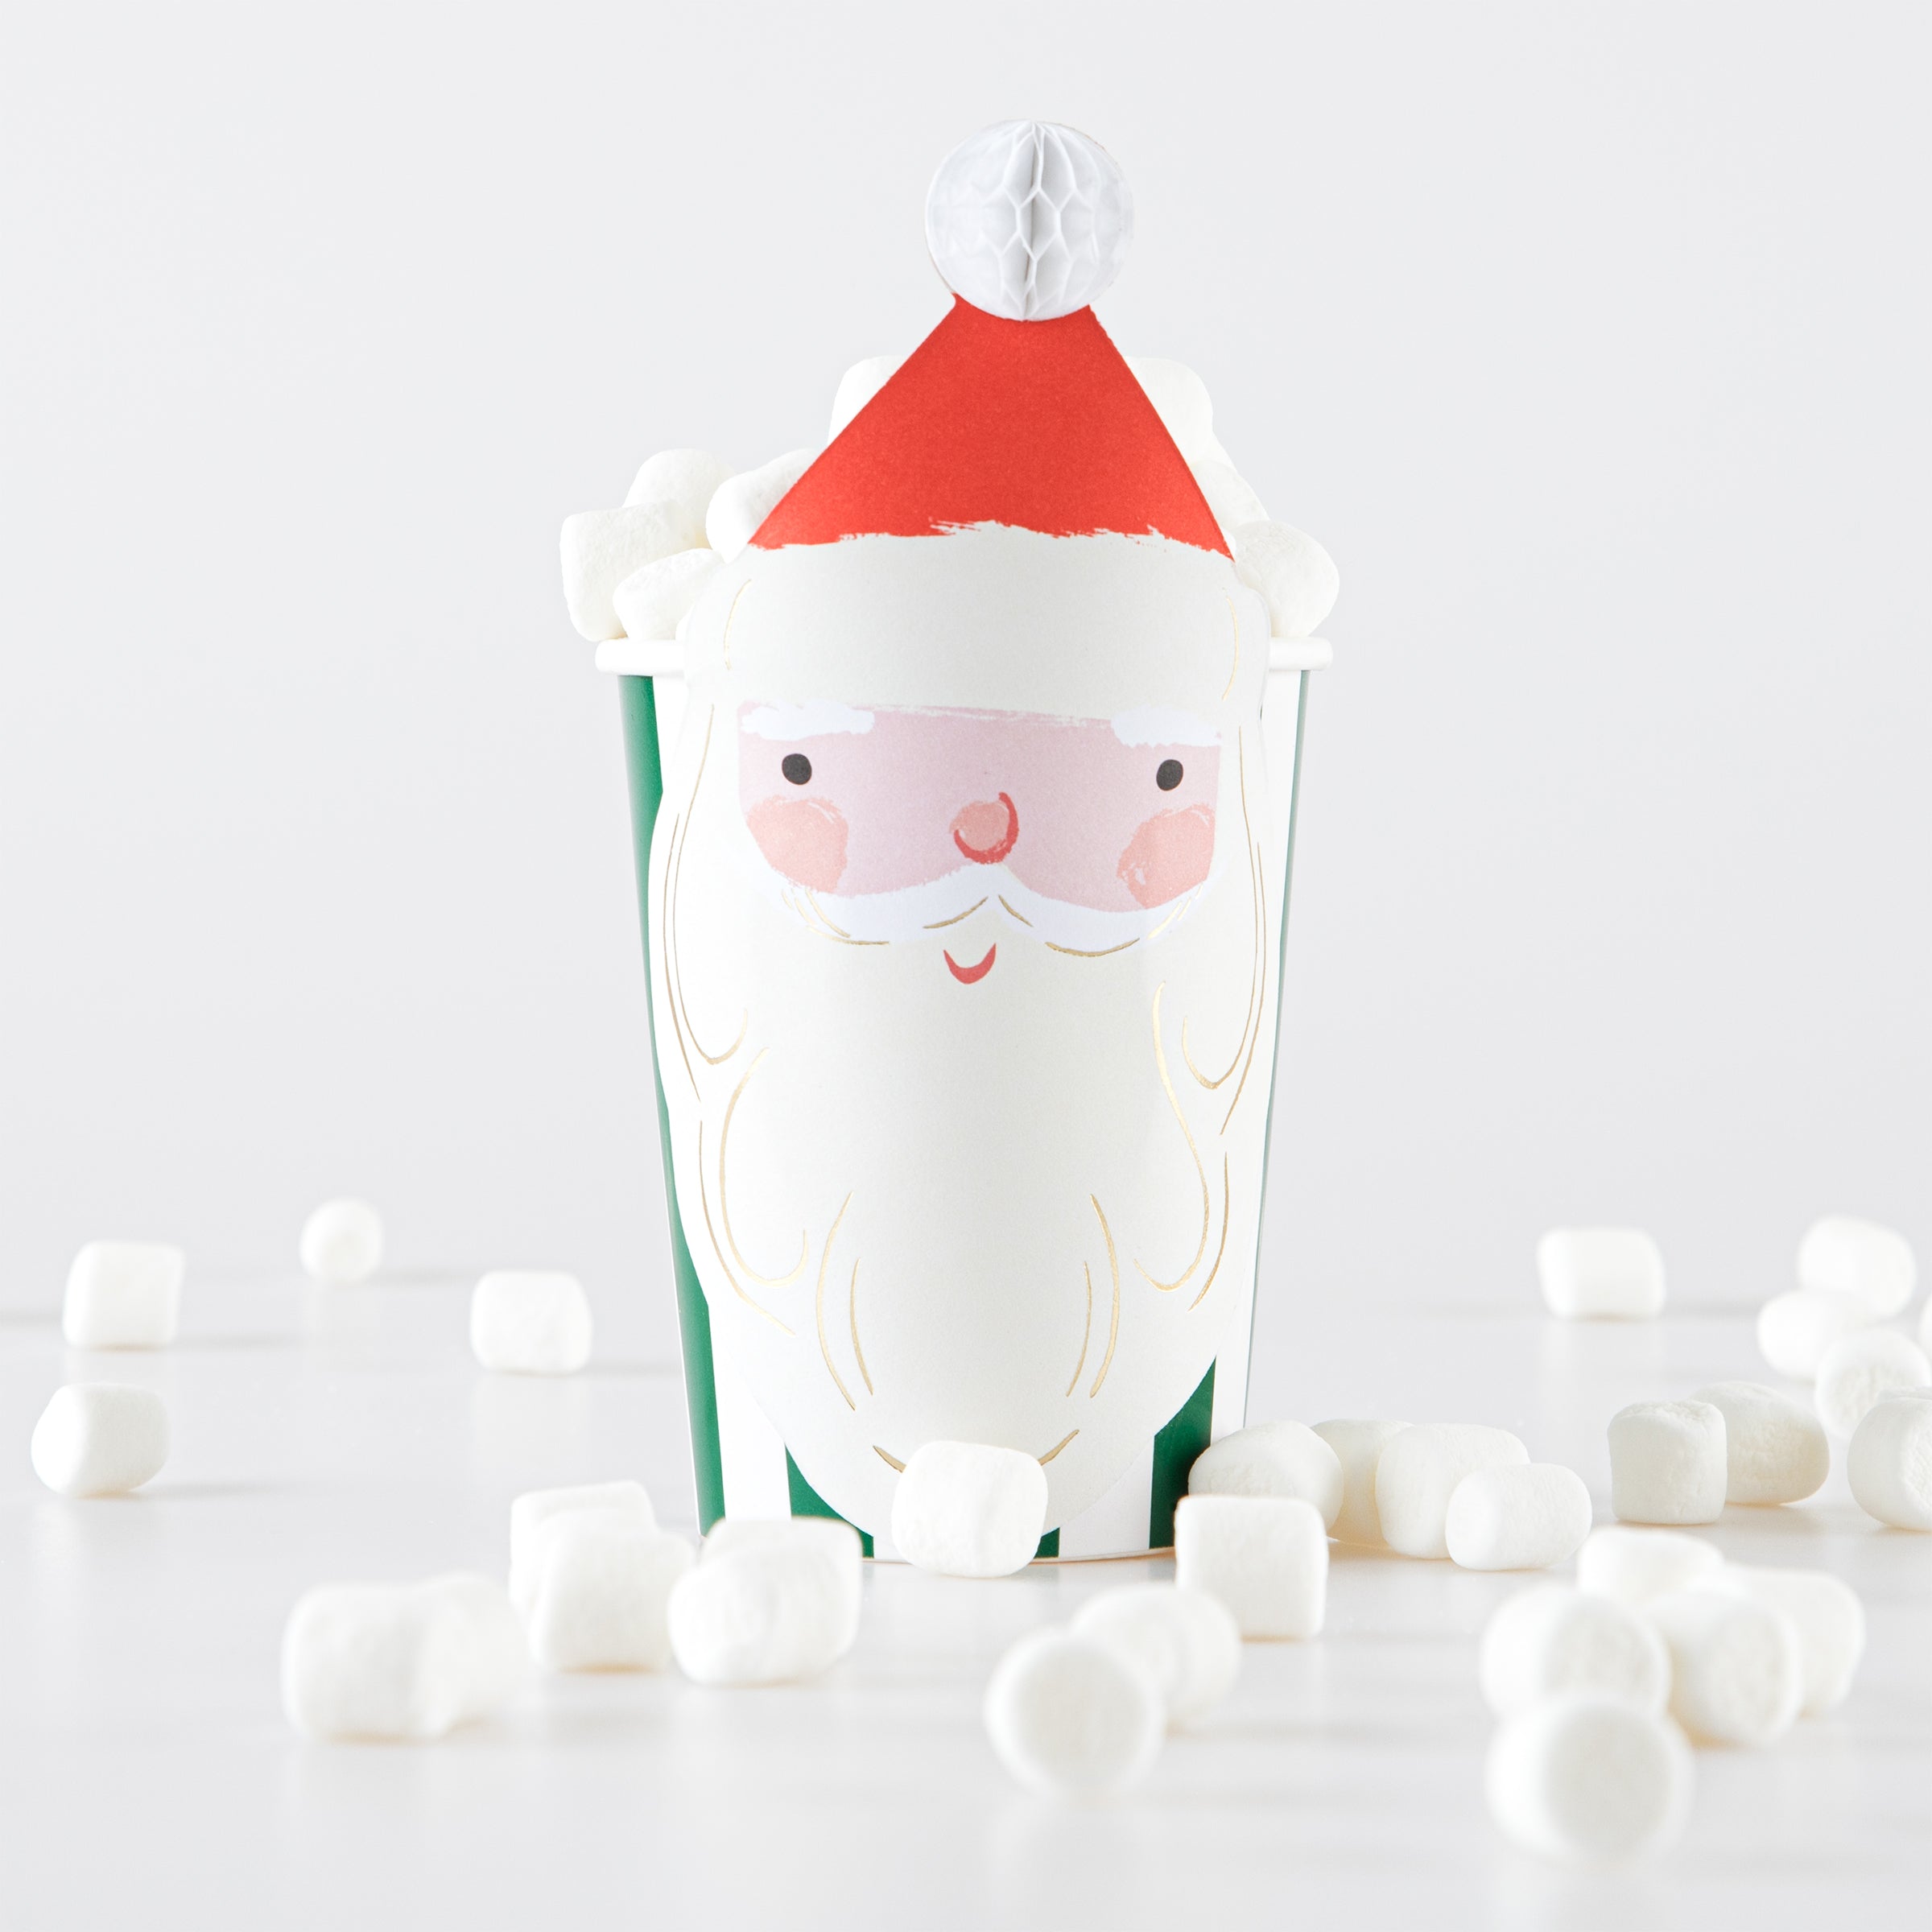 Our party cups, which include a Santa cup and reindeer cups, will make your Christmas drinks look amazing.